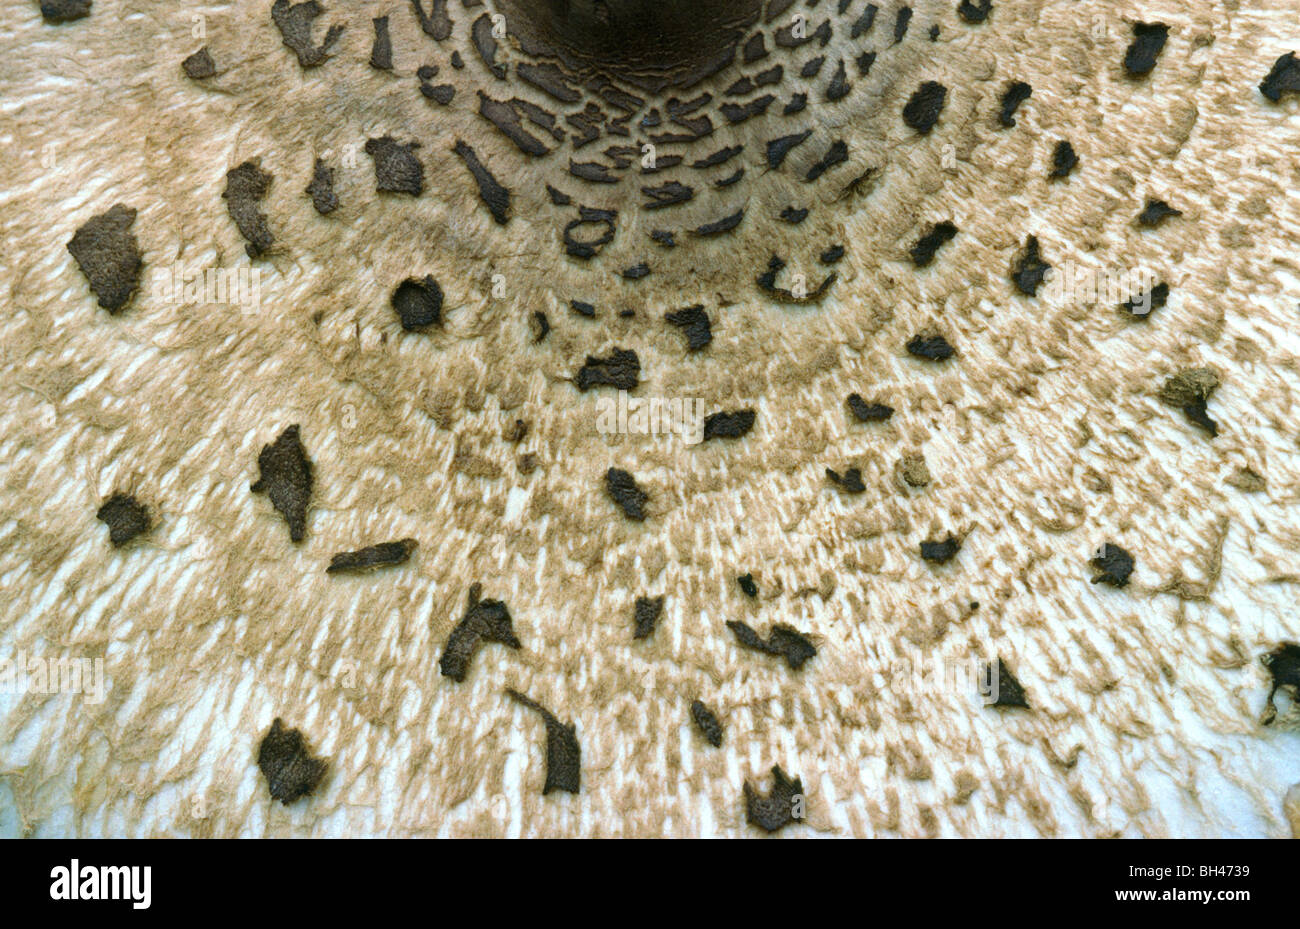 Shaggy ink-cap (Coprinus comatus). Close up abstract image of textured surface of cap. Stock Photo